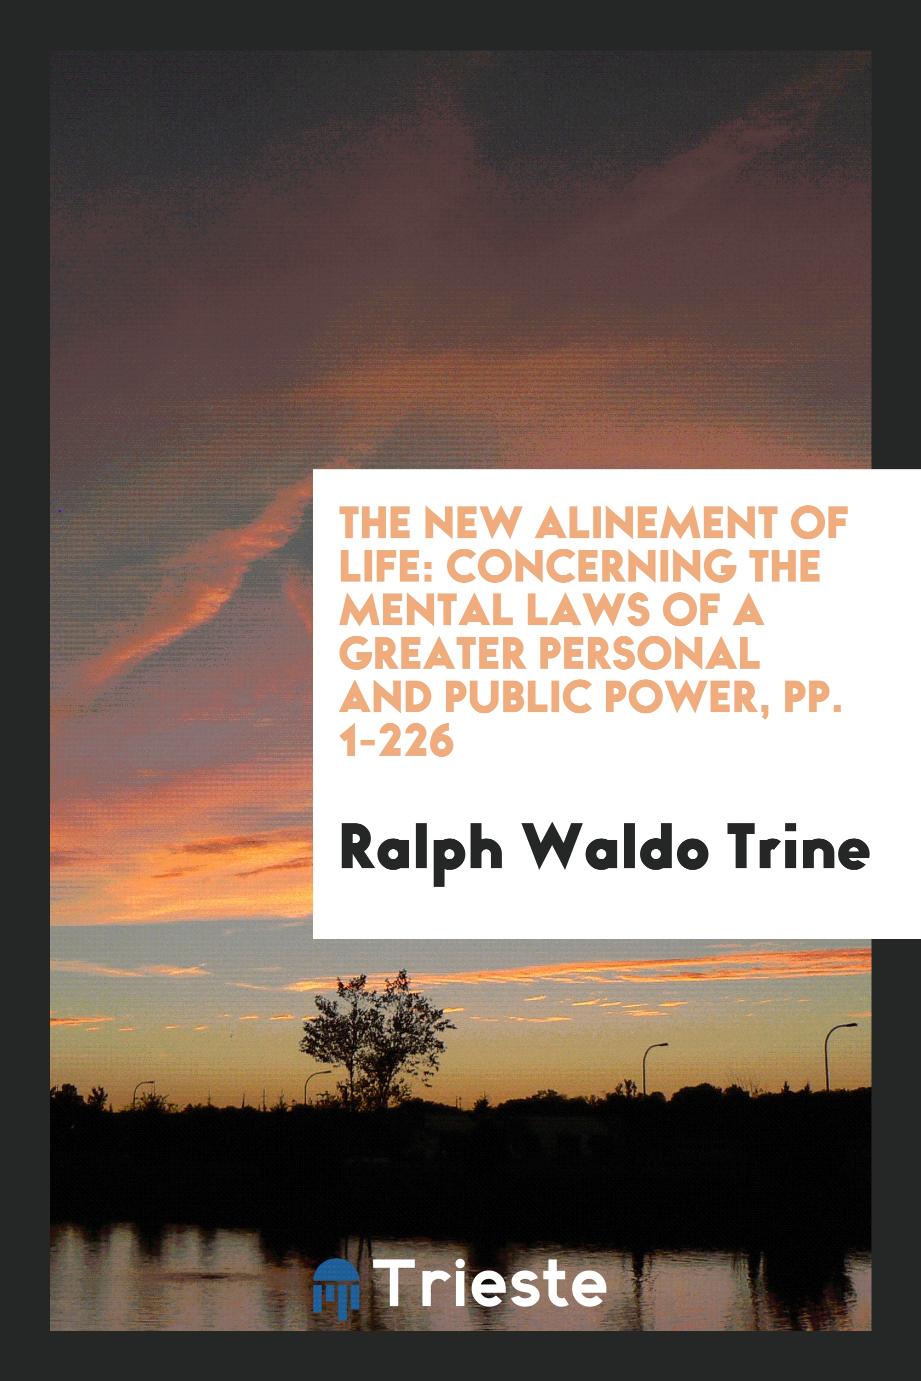 The New Alinement of Life: Concerning the Mental Laws of a Greater Personal and Public Power, pp. 1-226